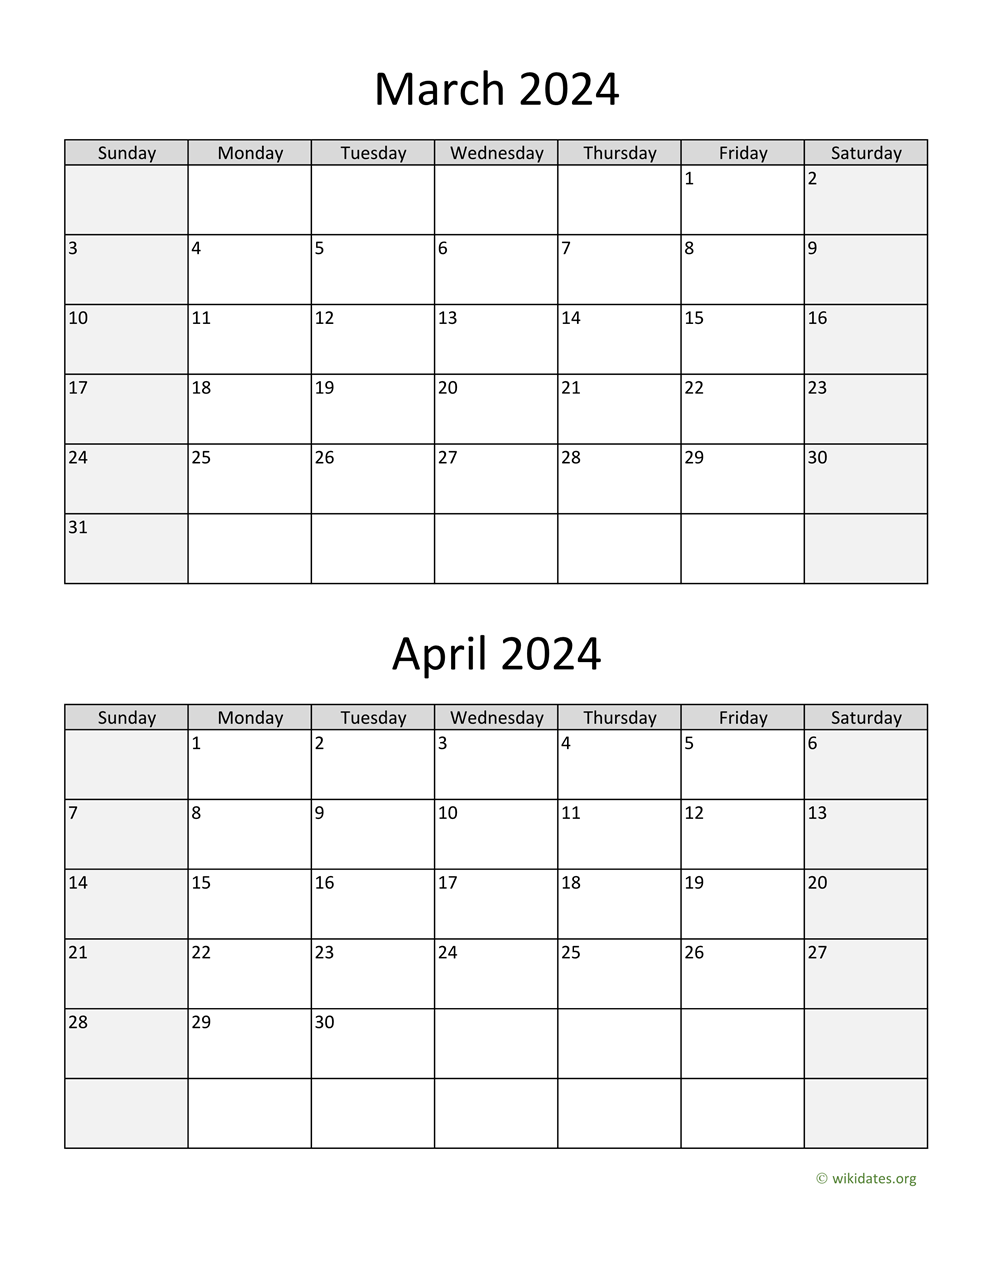 March And April 2024 Calendar | Wikidates for March April 2024 Calendar Printable